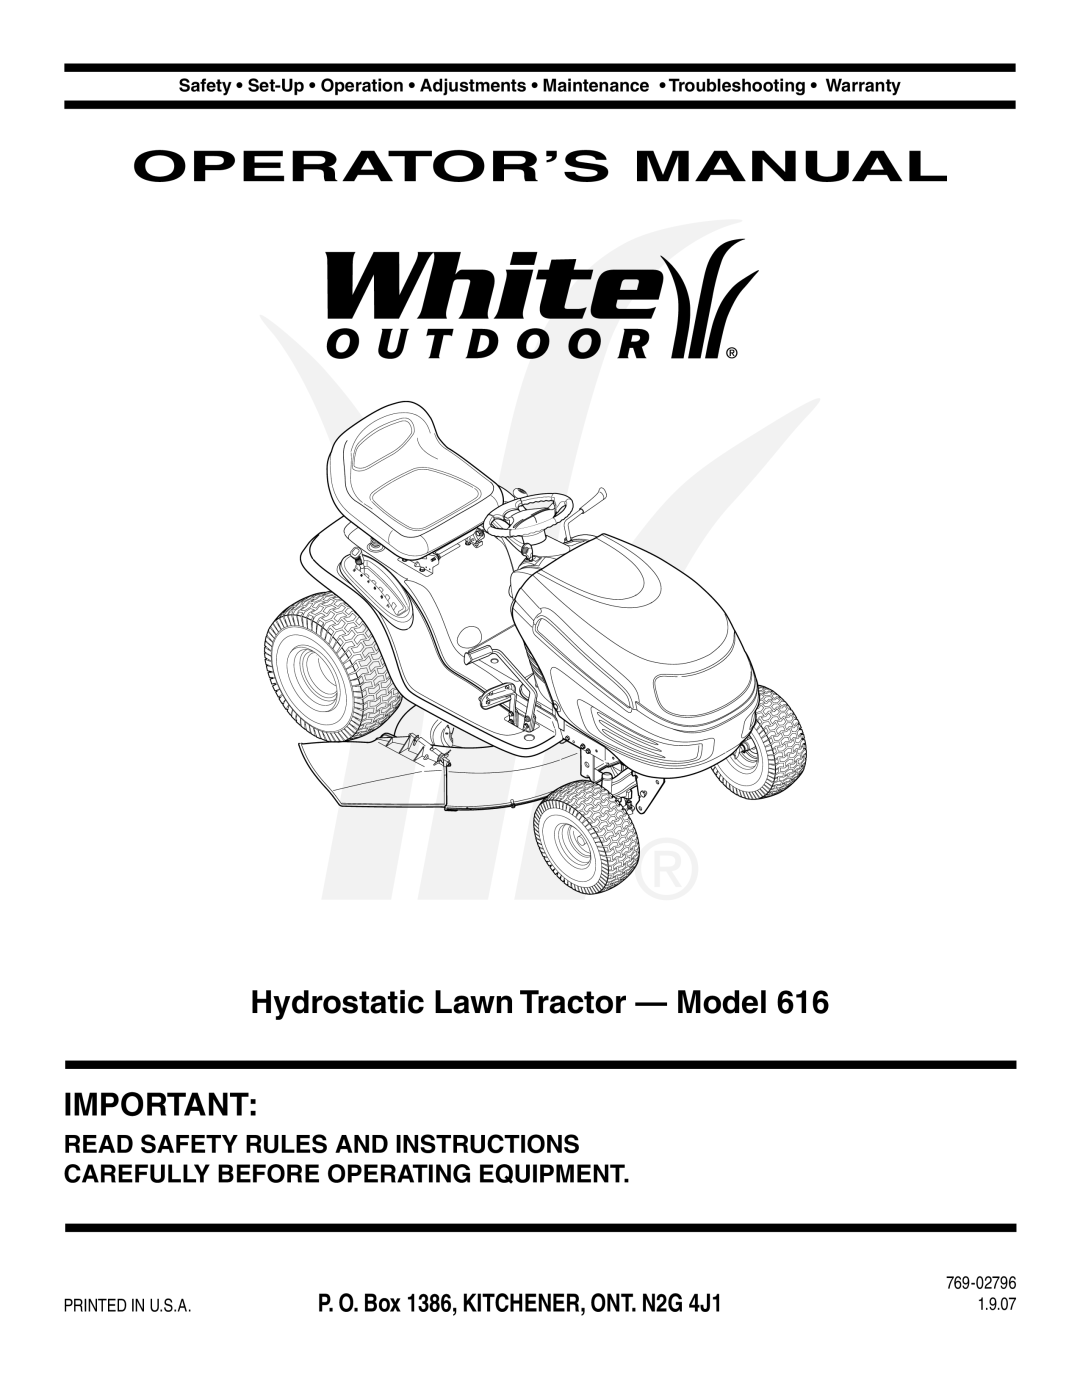 MTD 616 warranty Operator’S Manual, Hydrostatic Lawn Tractor - Model, Read Safety Rules And Instructions 